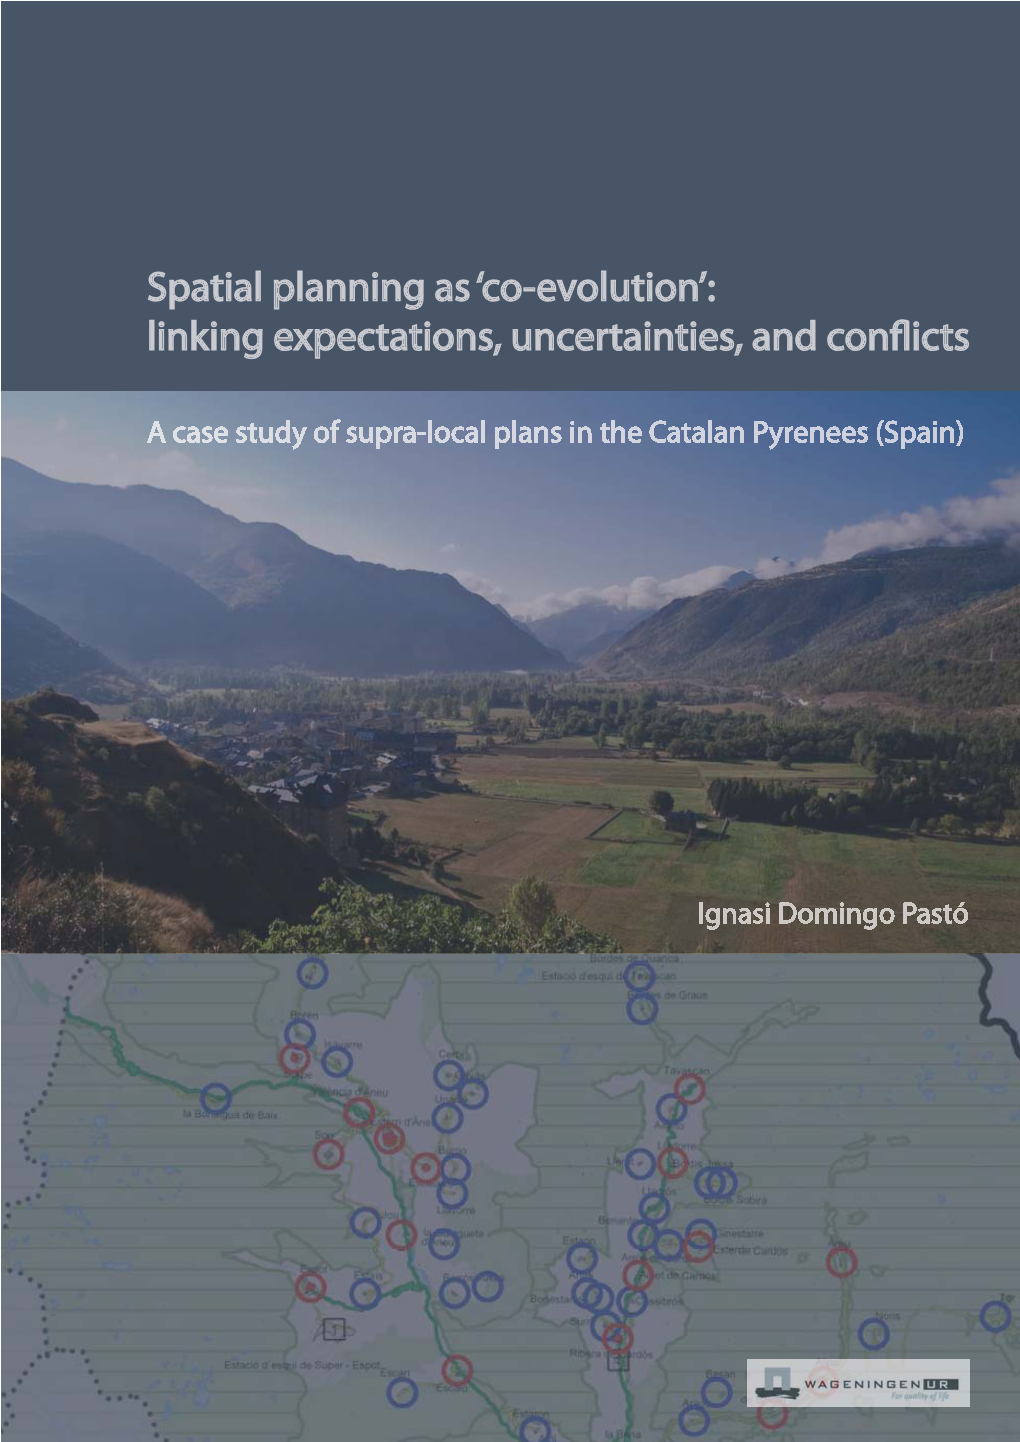 Spatial Planning As 'Co-Evolution'